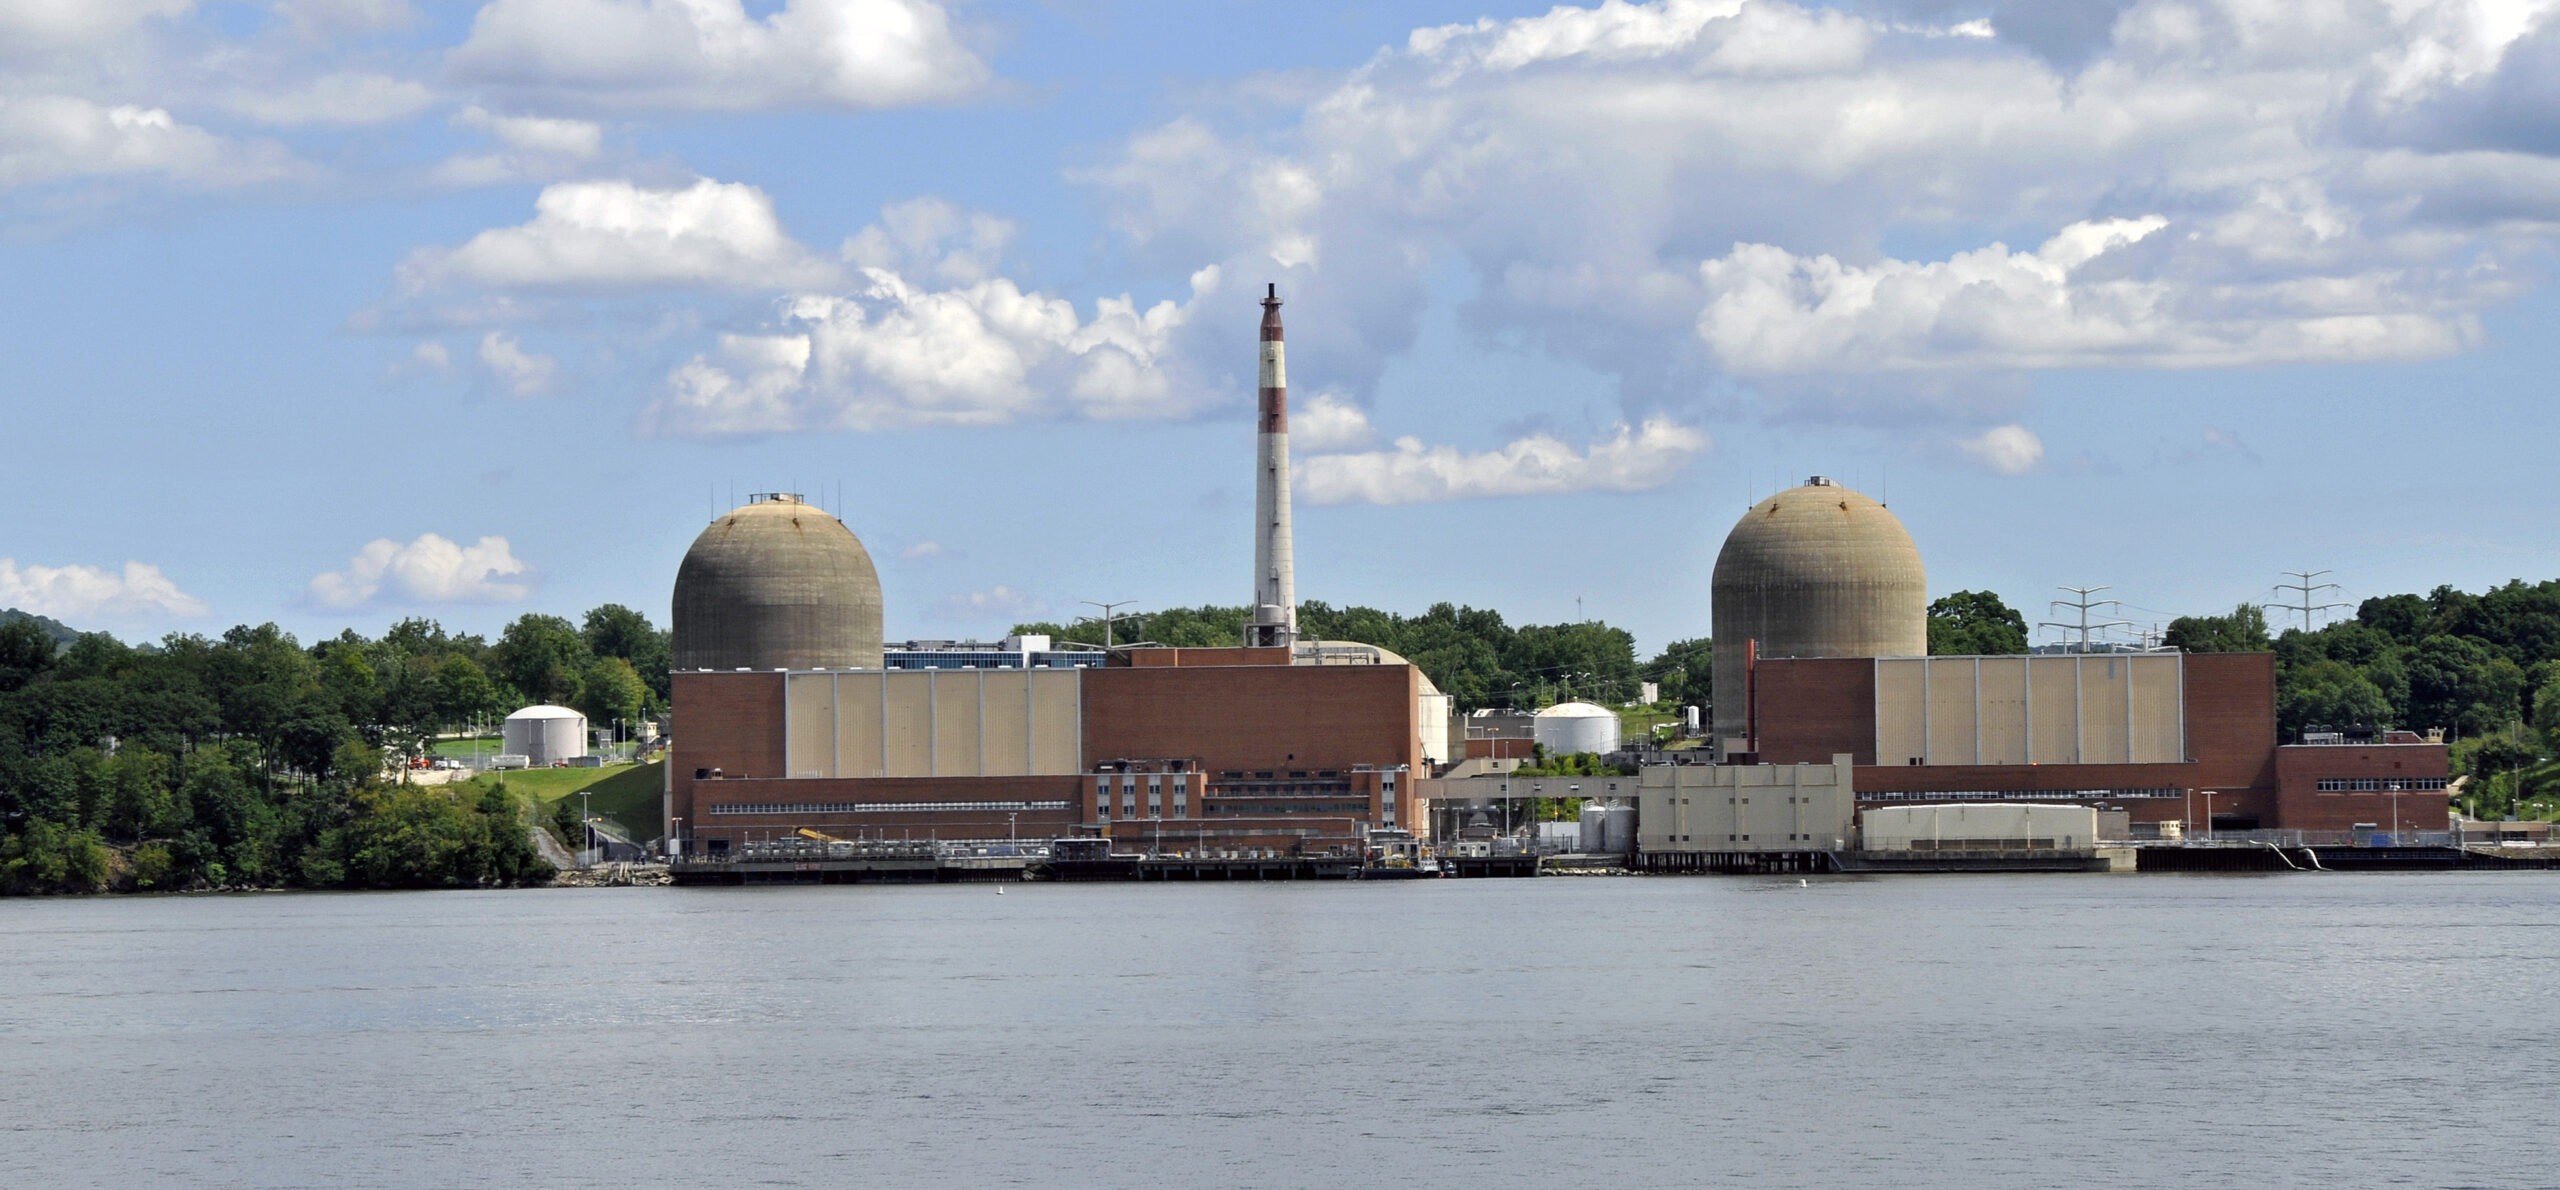 nuclear power plant by a river